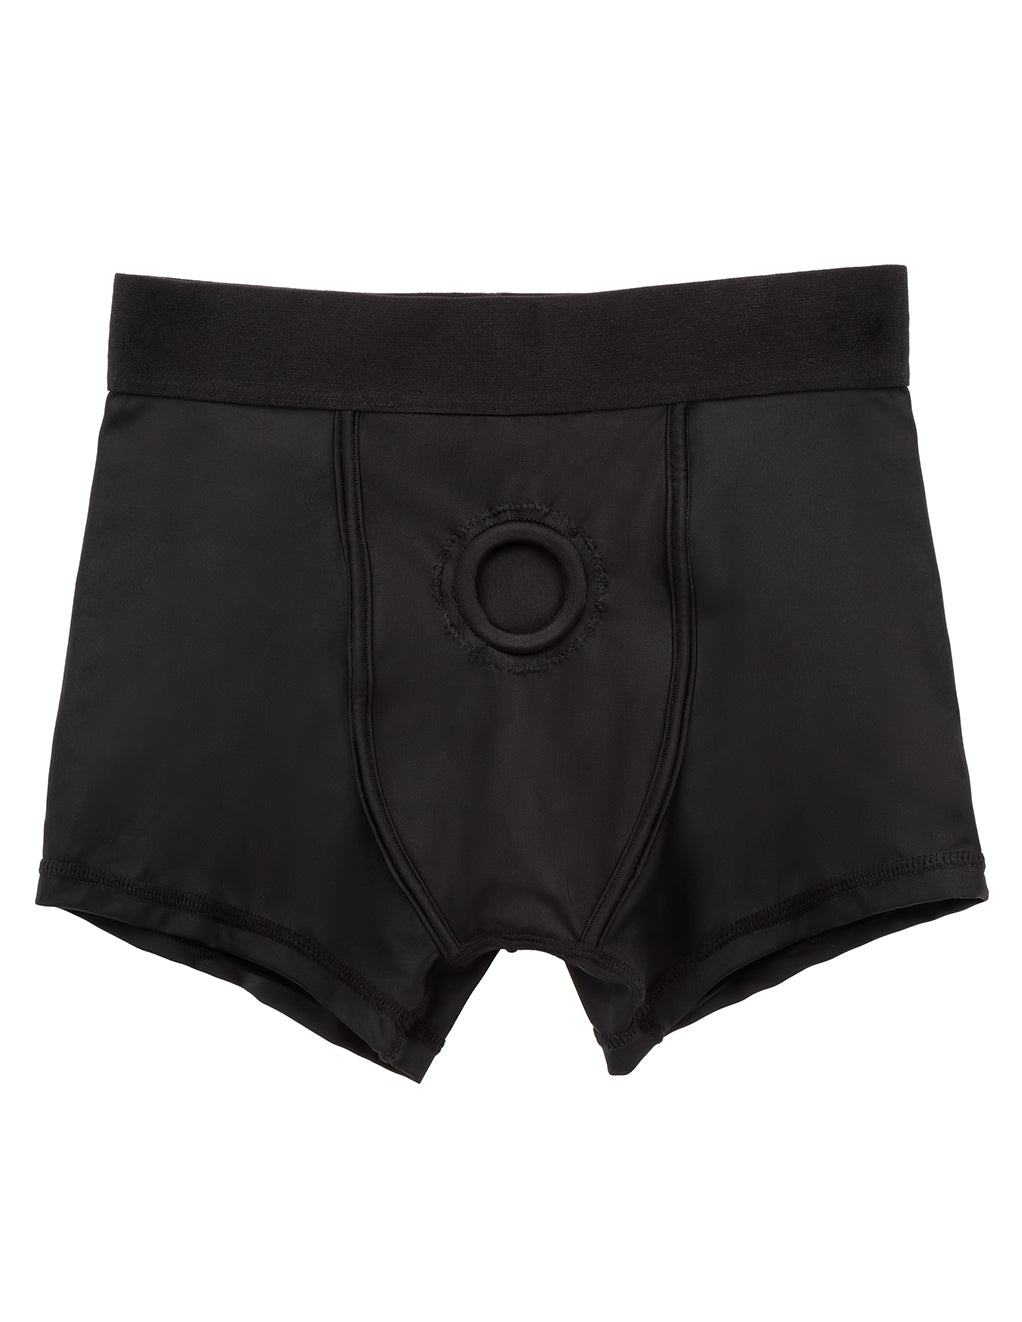 Boundless Boxer Brief- Front